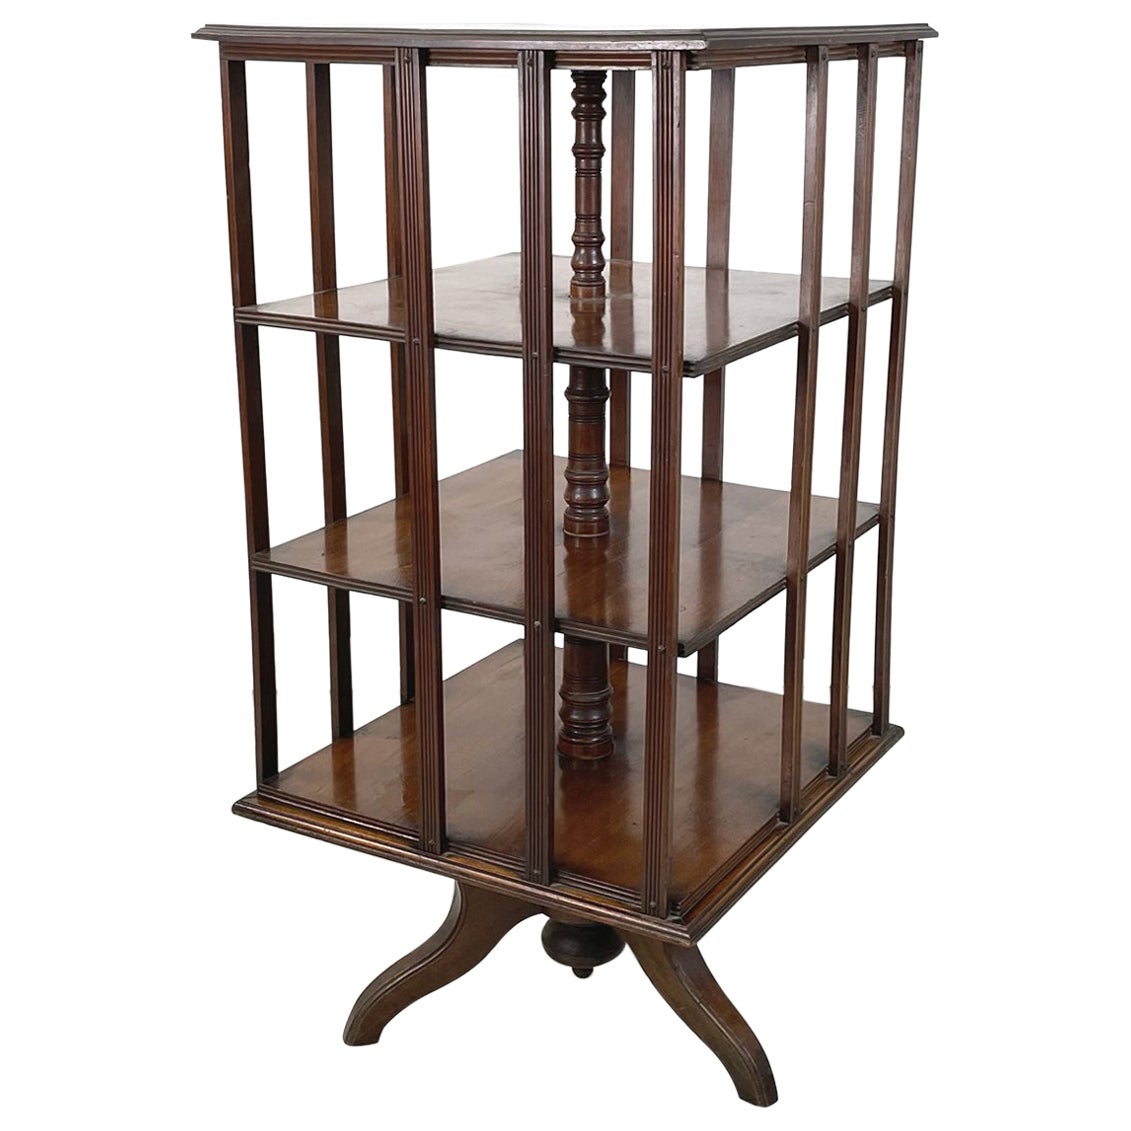 English antique Revolving bookcase in solid wood, 1920s